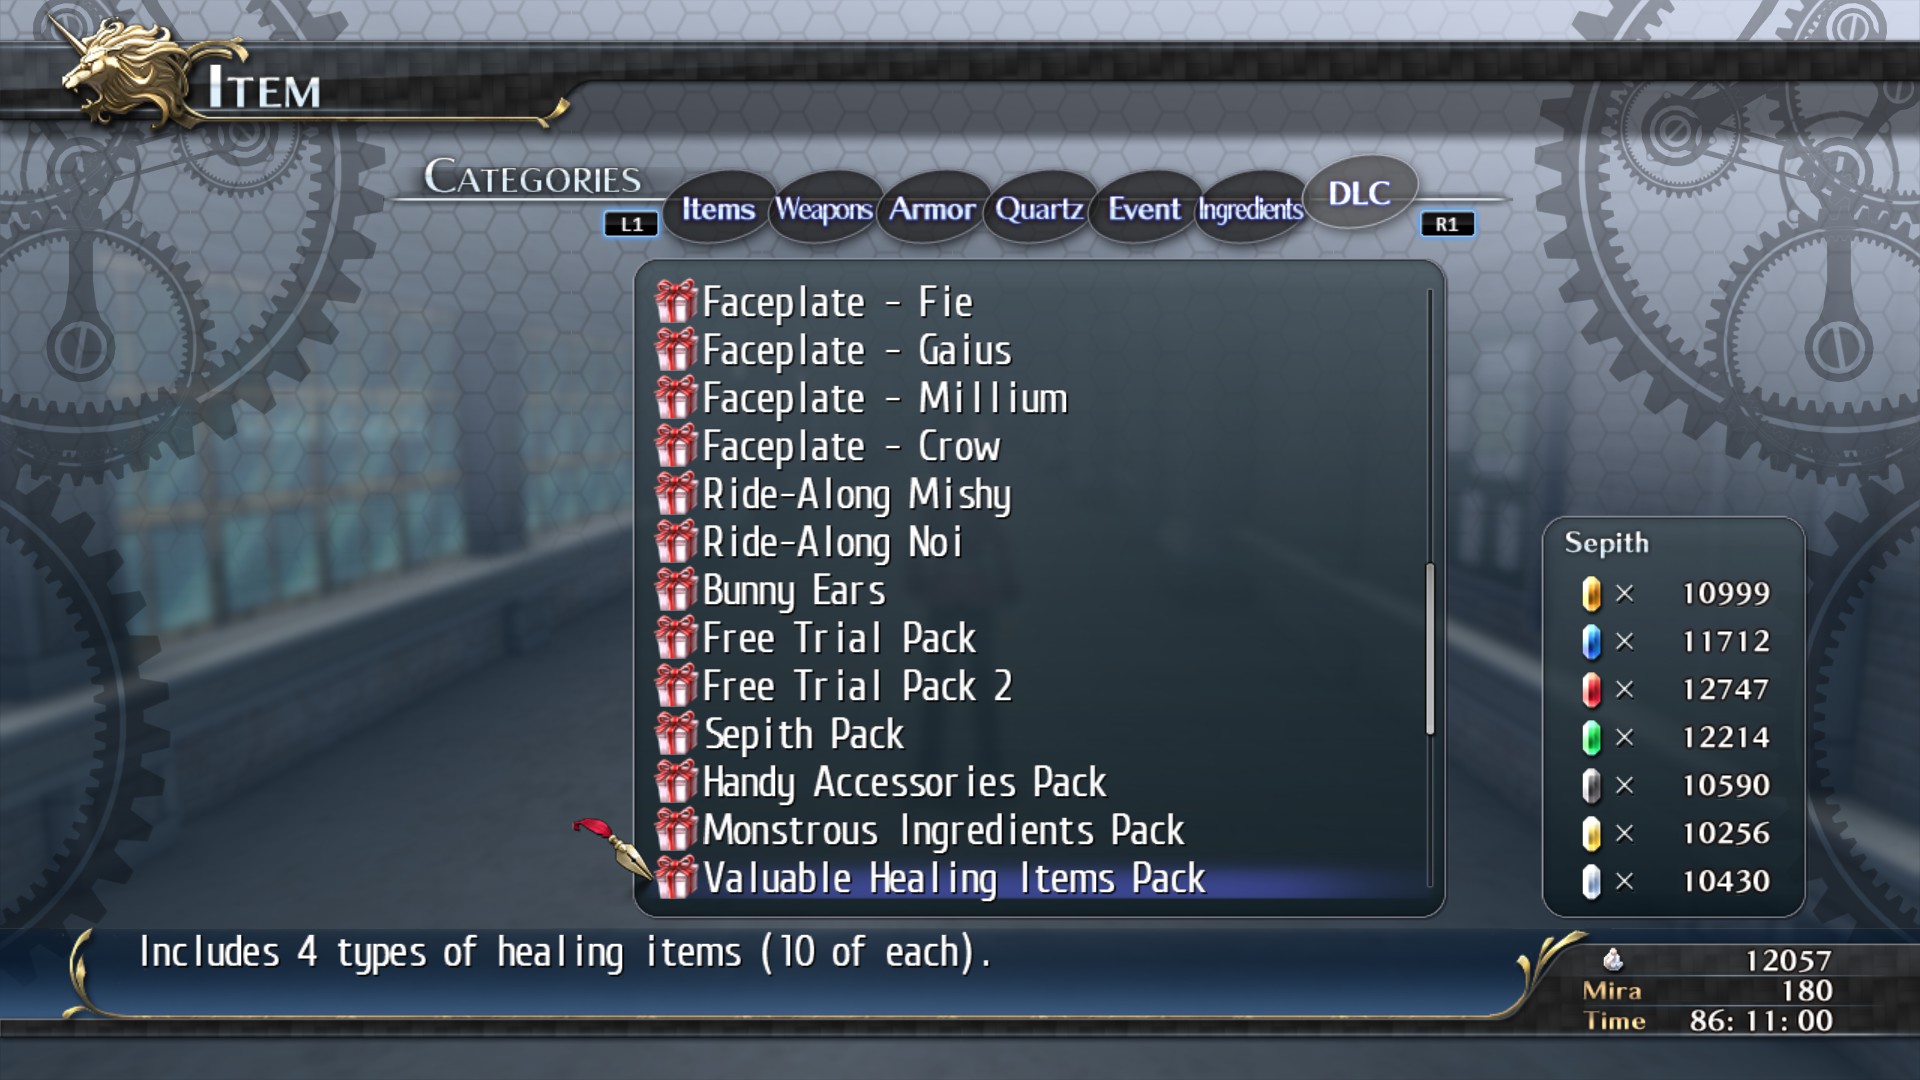 The Legend of Heroes: Trails of Cold Steel - Valuable Healing Items Pack Featured Screenshot #1